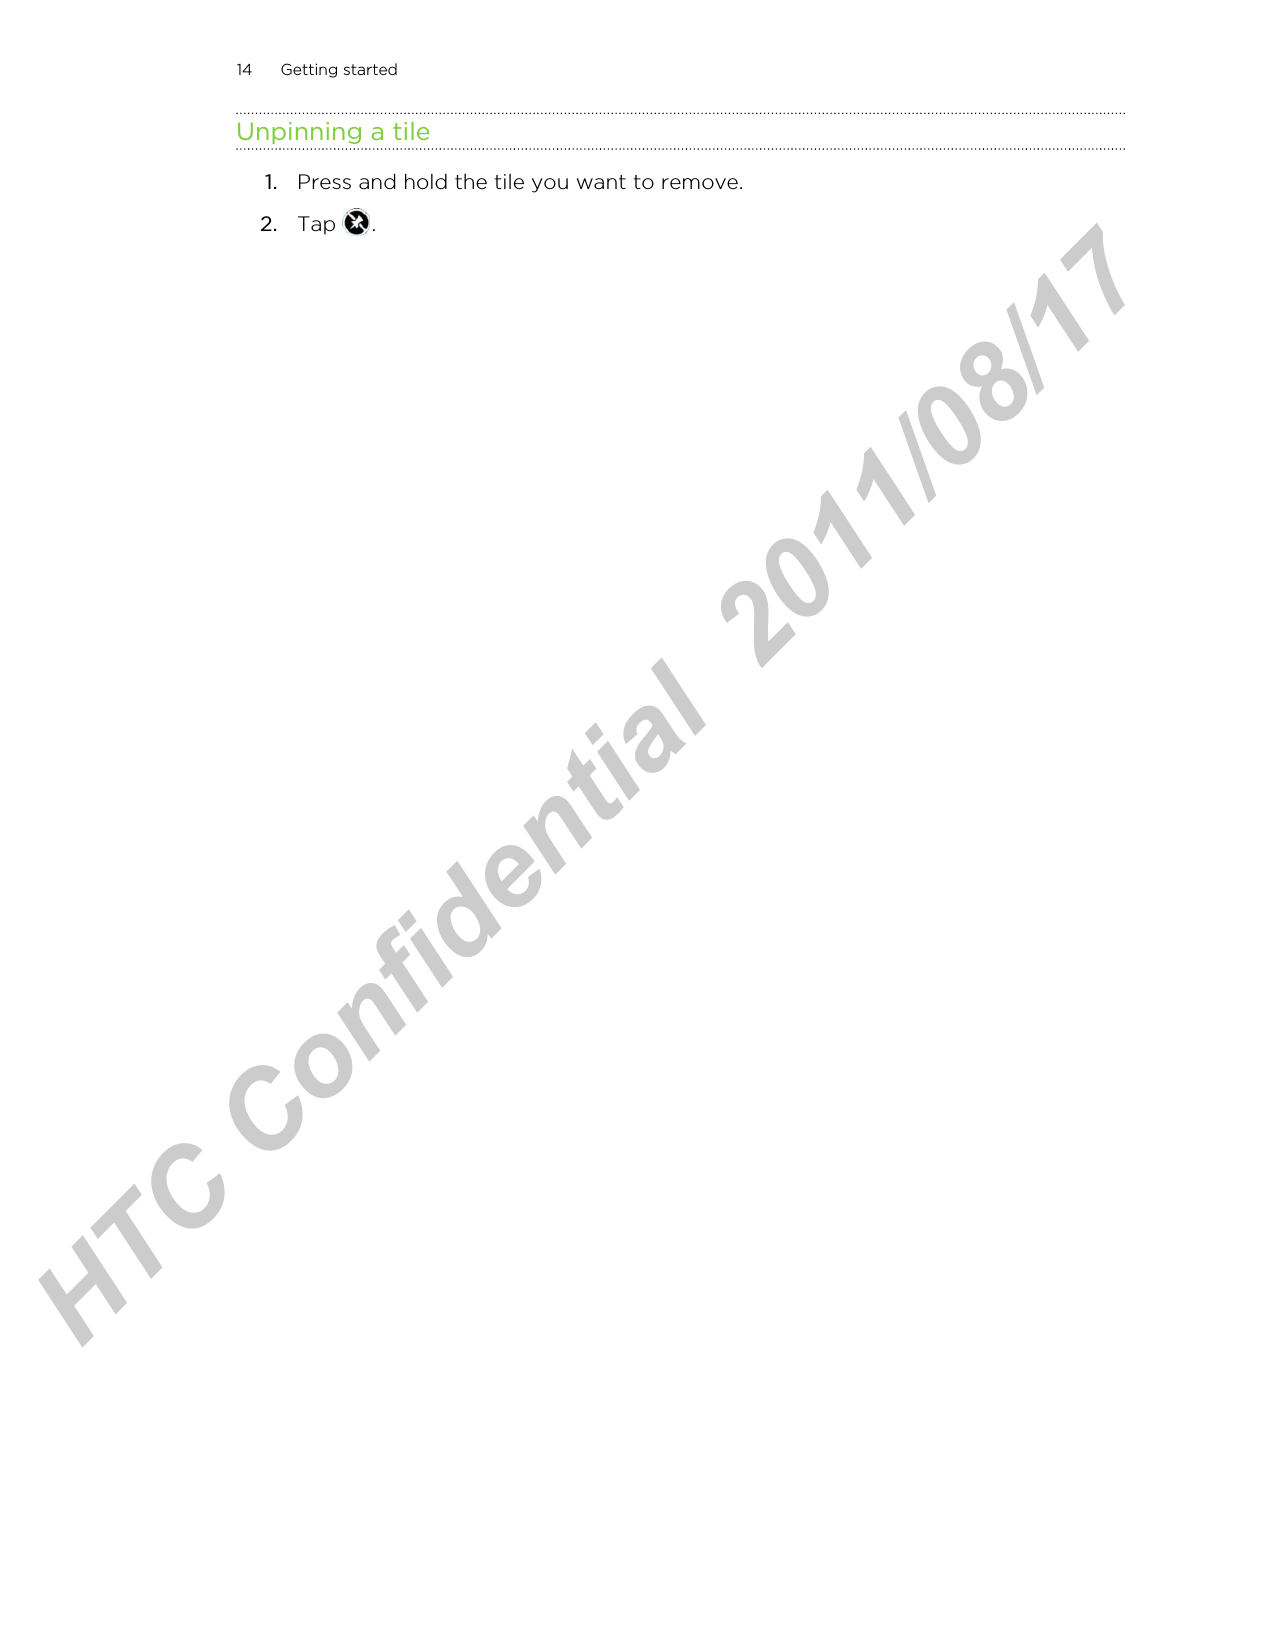 Unpinning a tile1. Press and hold the tile you want to remove.2. Tap  .14 Getting startedHTC Confidential  2011/08/17 